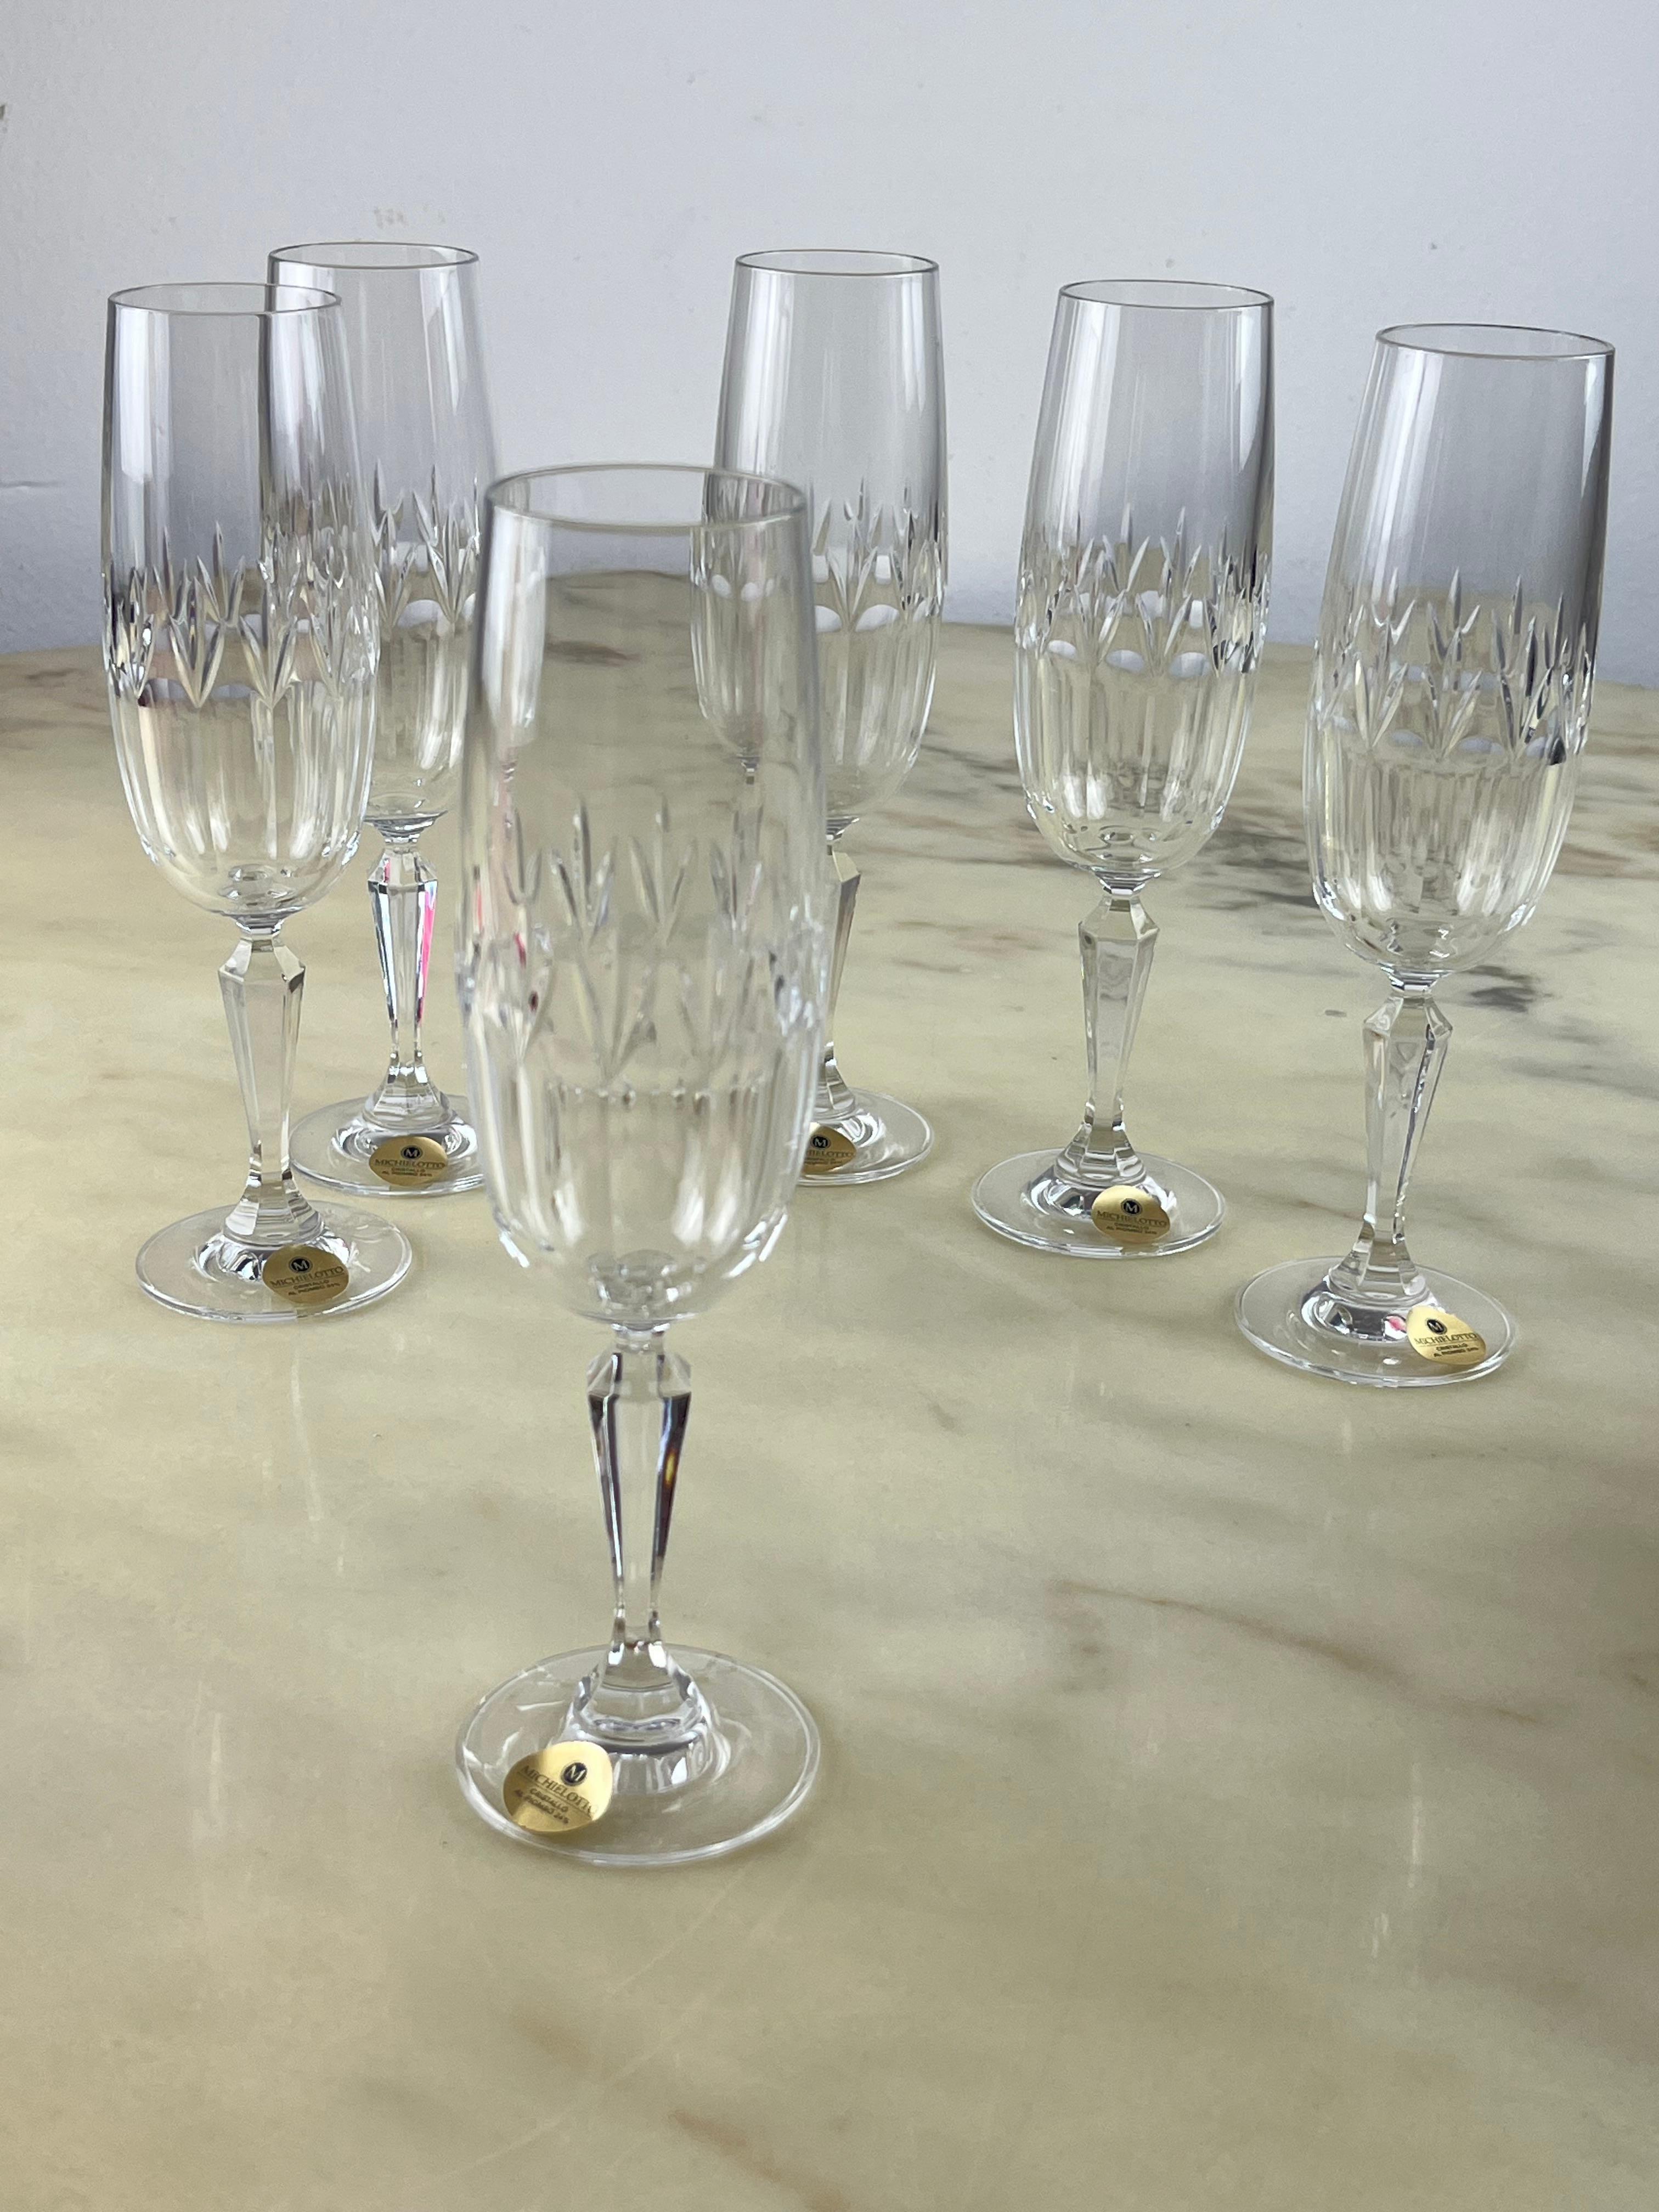 Other Set of 6 Bohemia Crystal Champagne Glasses, Czech Republic, 1980s, never used For Sale